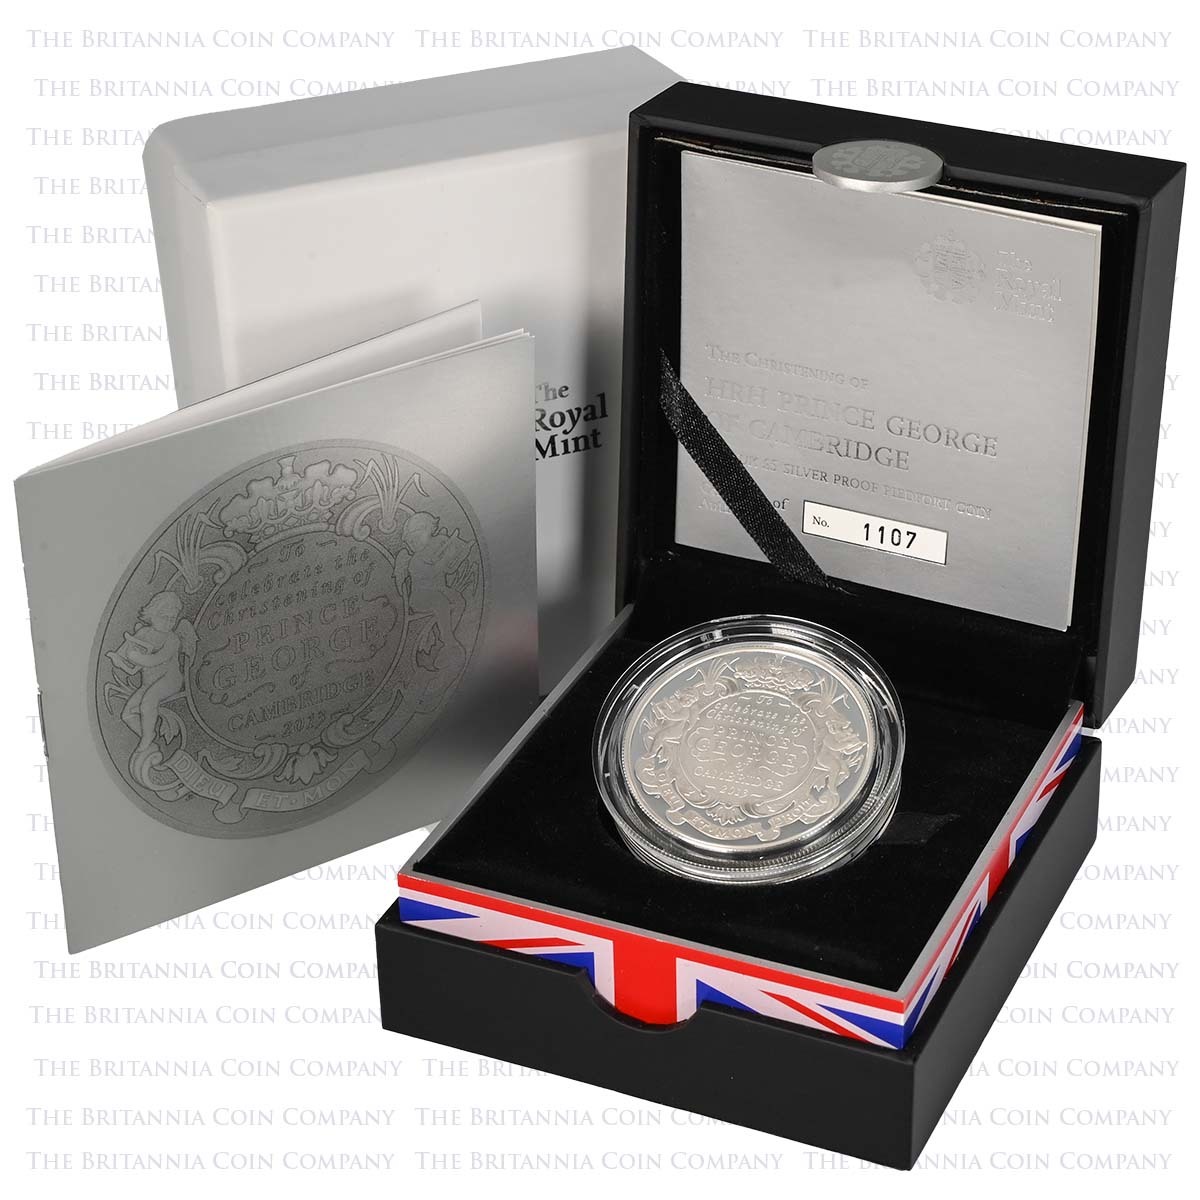 UKGCPF 2013 Prince George Christening Five Pound Crown Piedfort Silver Proof Coin Boxed